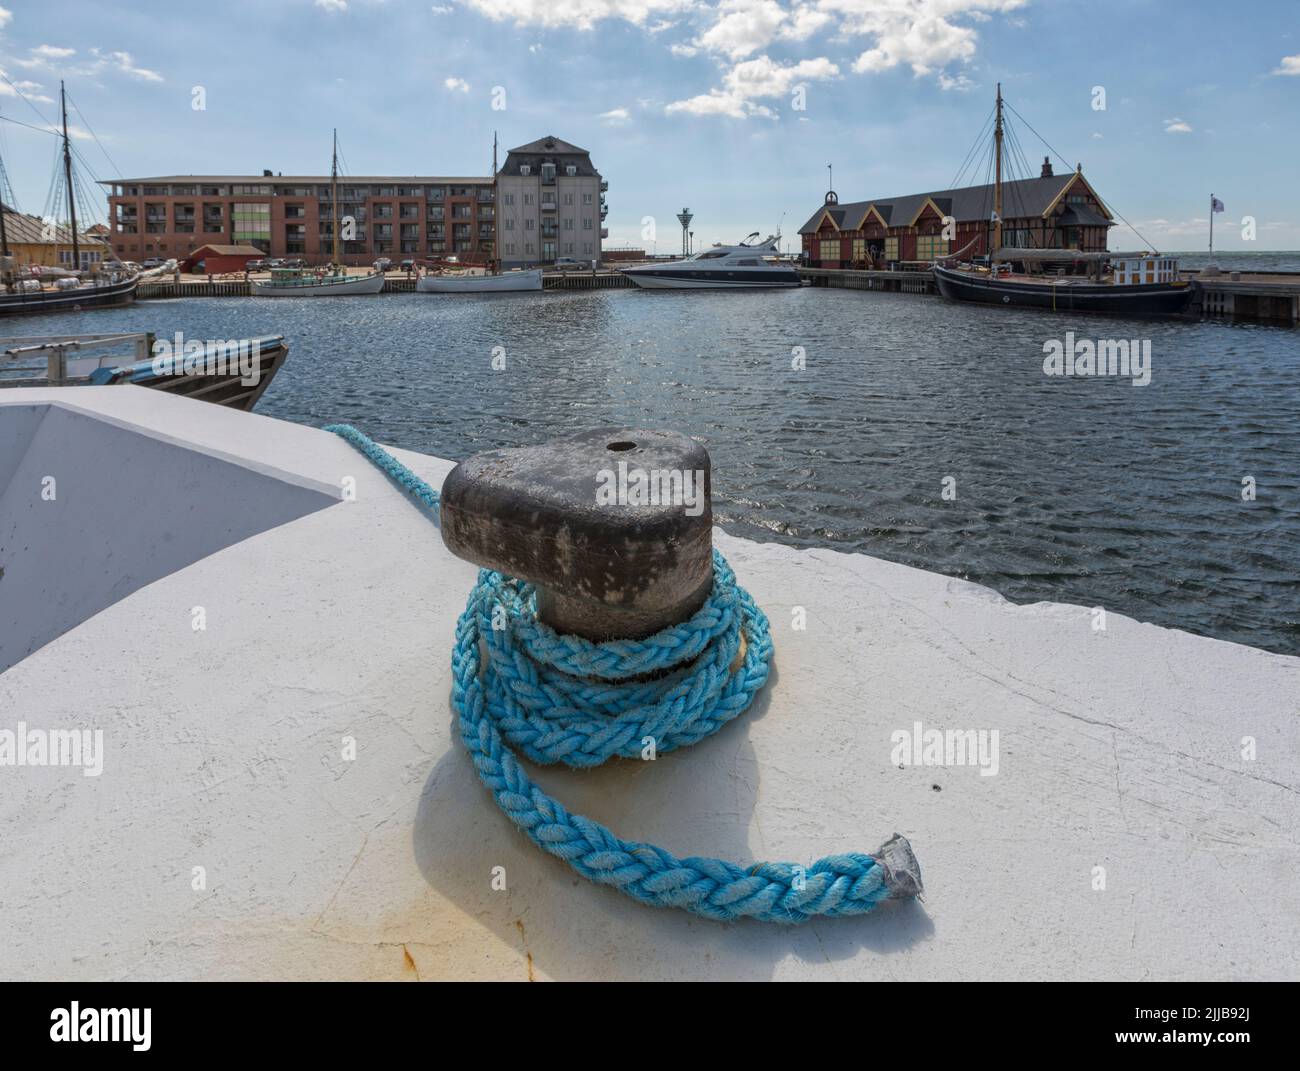 Harbor of Rudkøbing, Langeland, Denmark, with historic warehouse, old and new vessels. Mooring bollard in foeground. Stock Photo